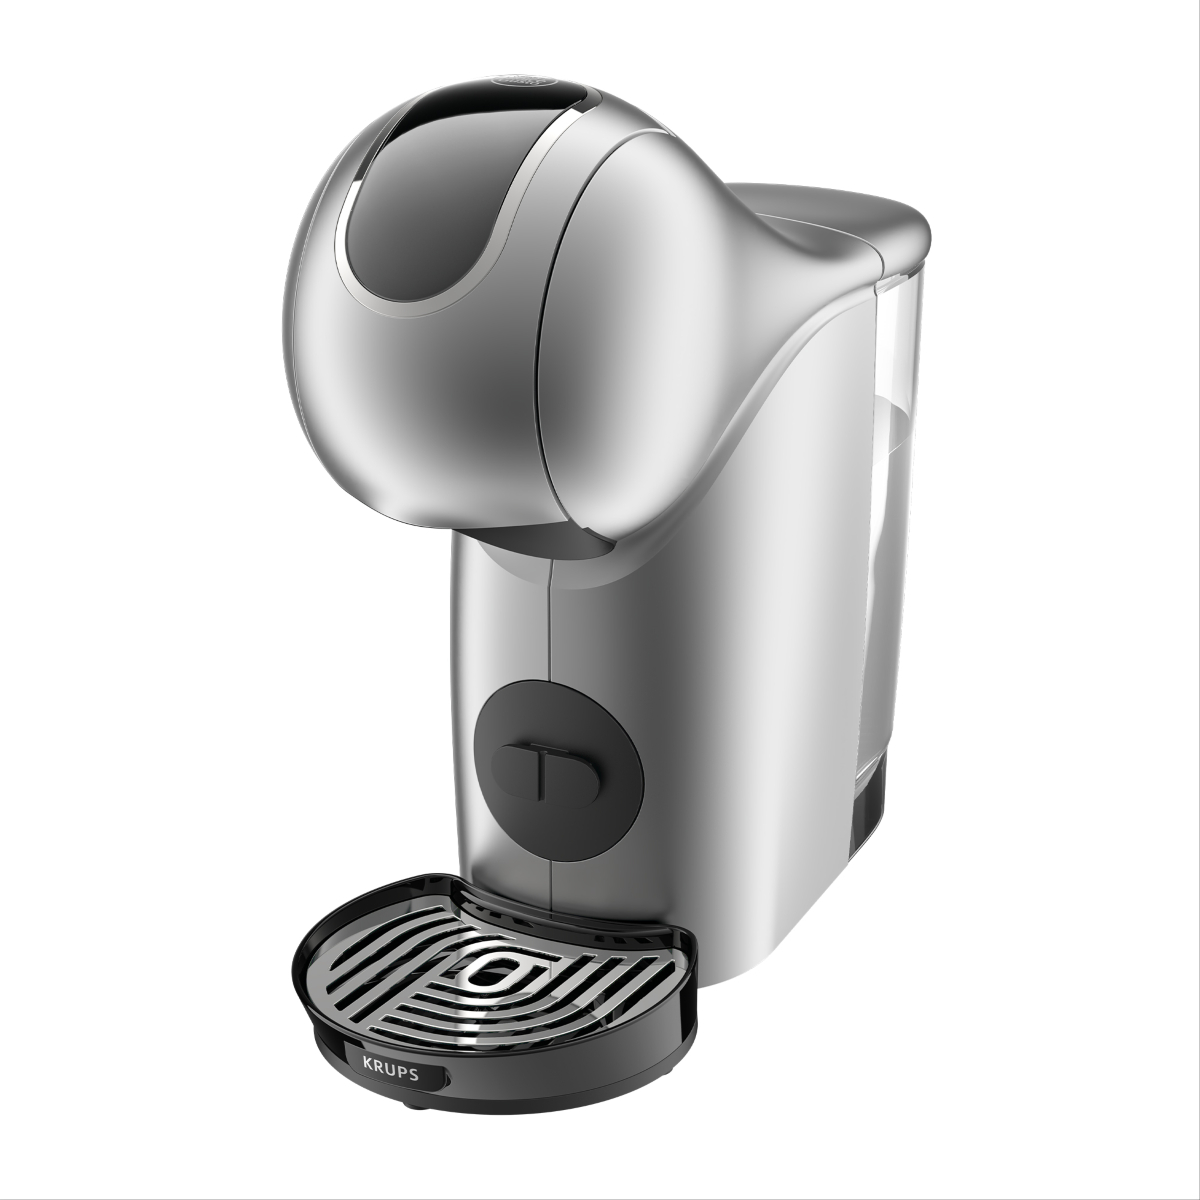 Cafetera Krups Dolce Gusto Infinisima Kp2708mx Negro